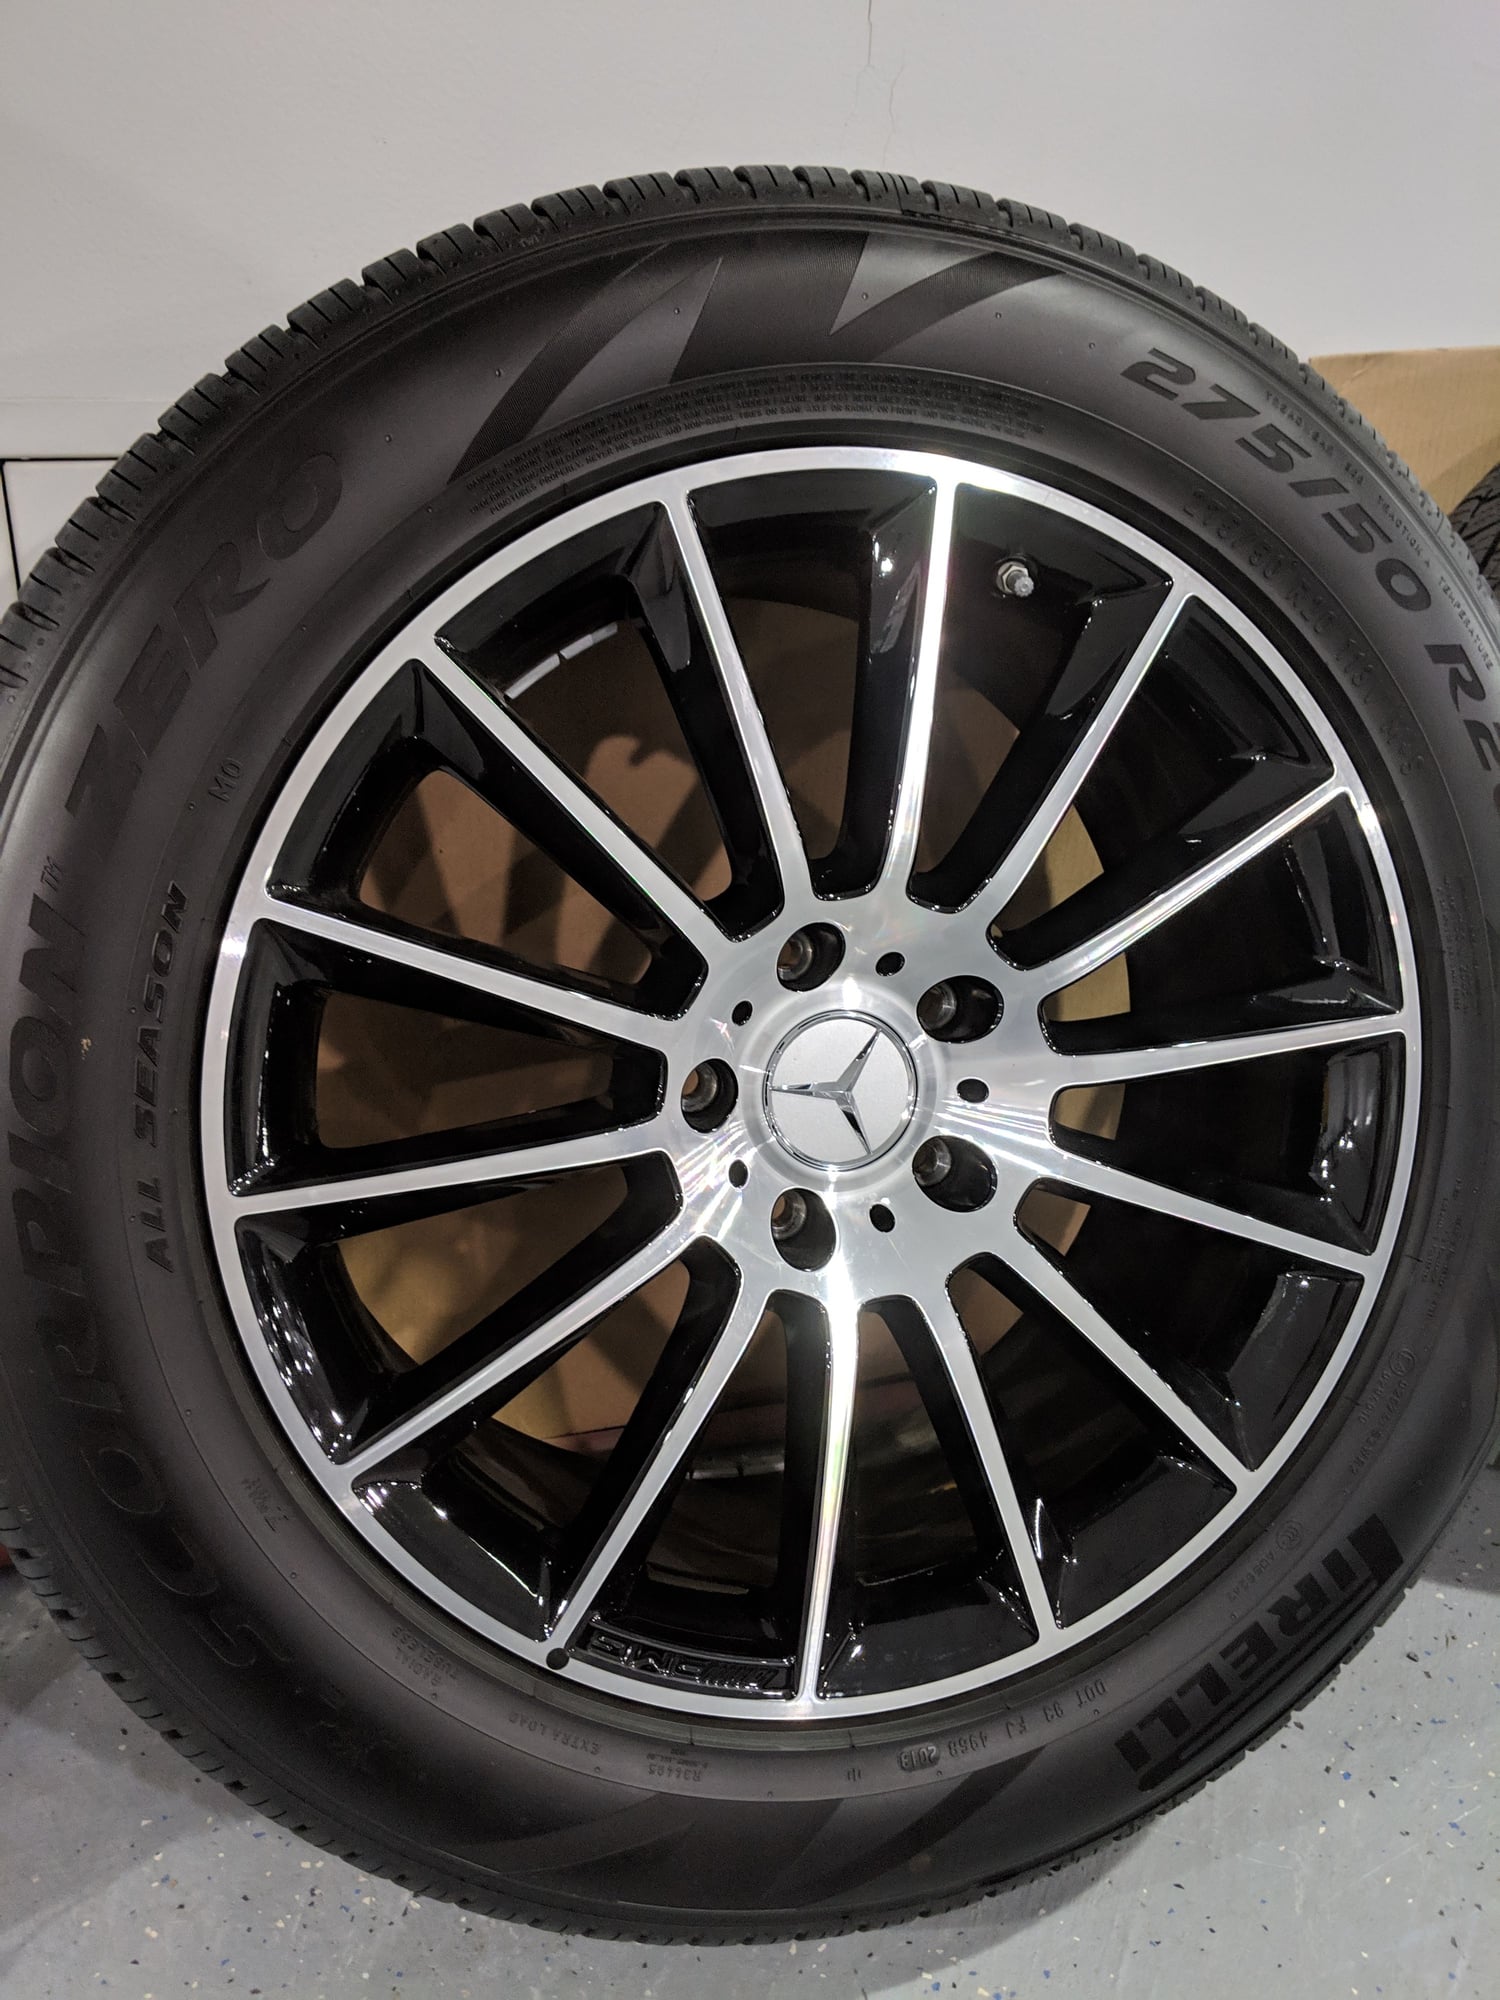 Wheels and Tires/Axles - 2019 NEW OEM Factory Mercedes-Benz AMG G550 Night Ed Black 20 WHEELS TIRES - New - All Years Mercedes-Benz G550 - New York, NY 10036, United States